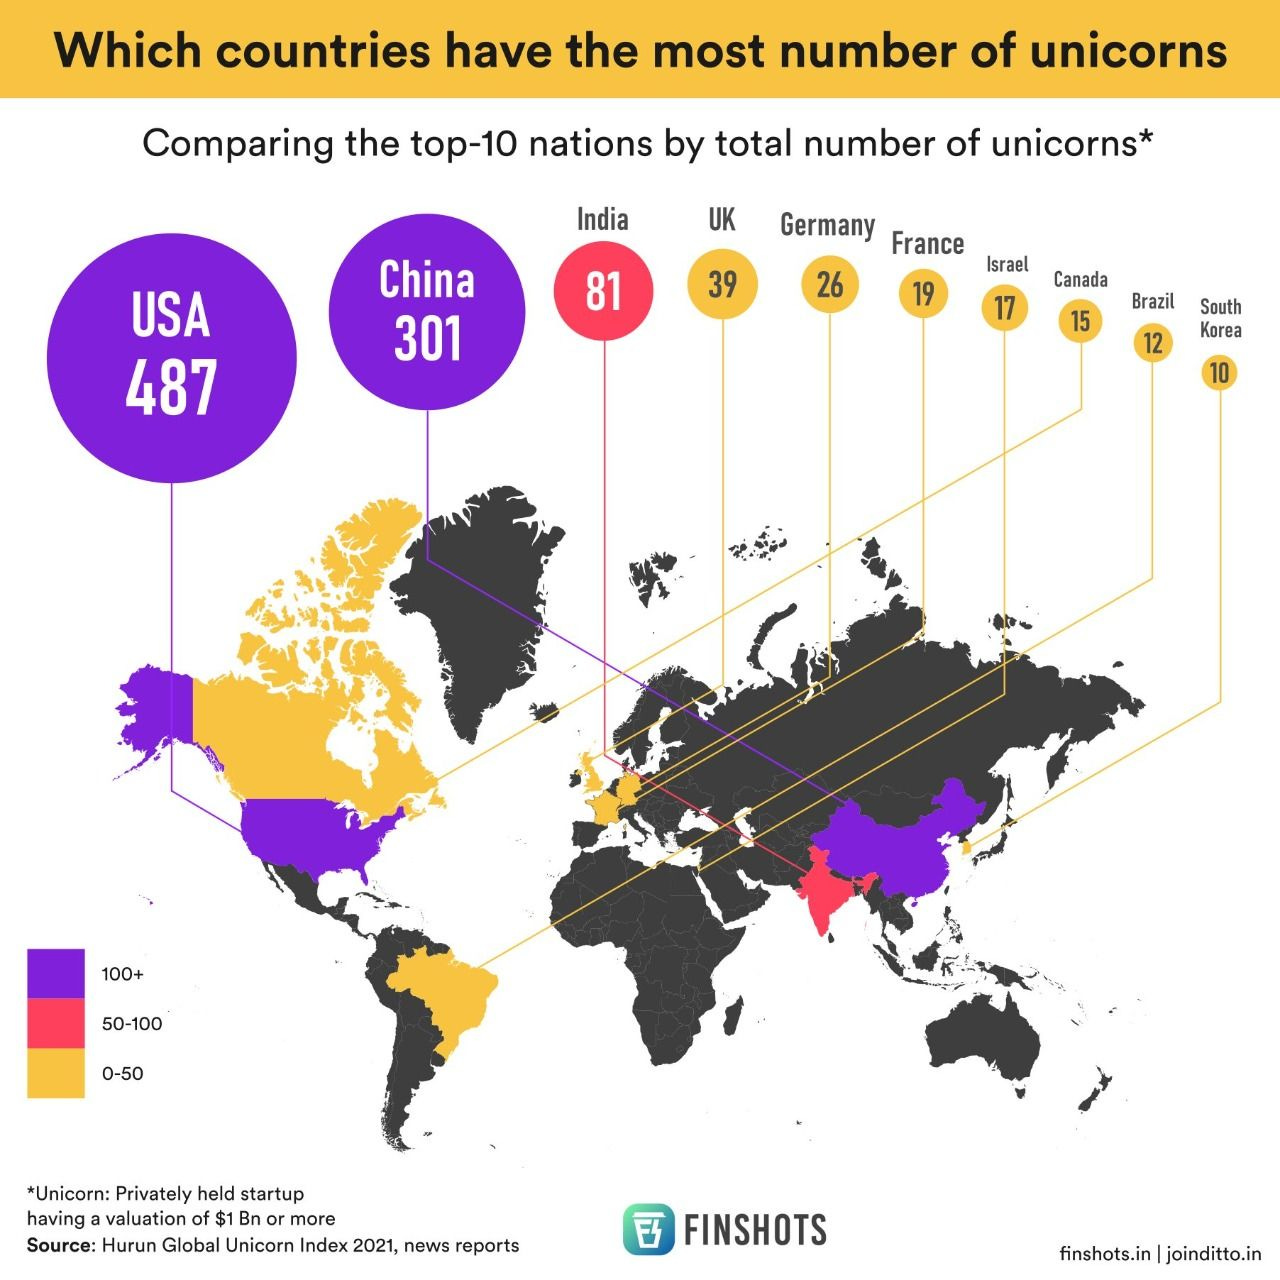 Which countries have the most number of unicorns?